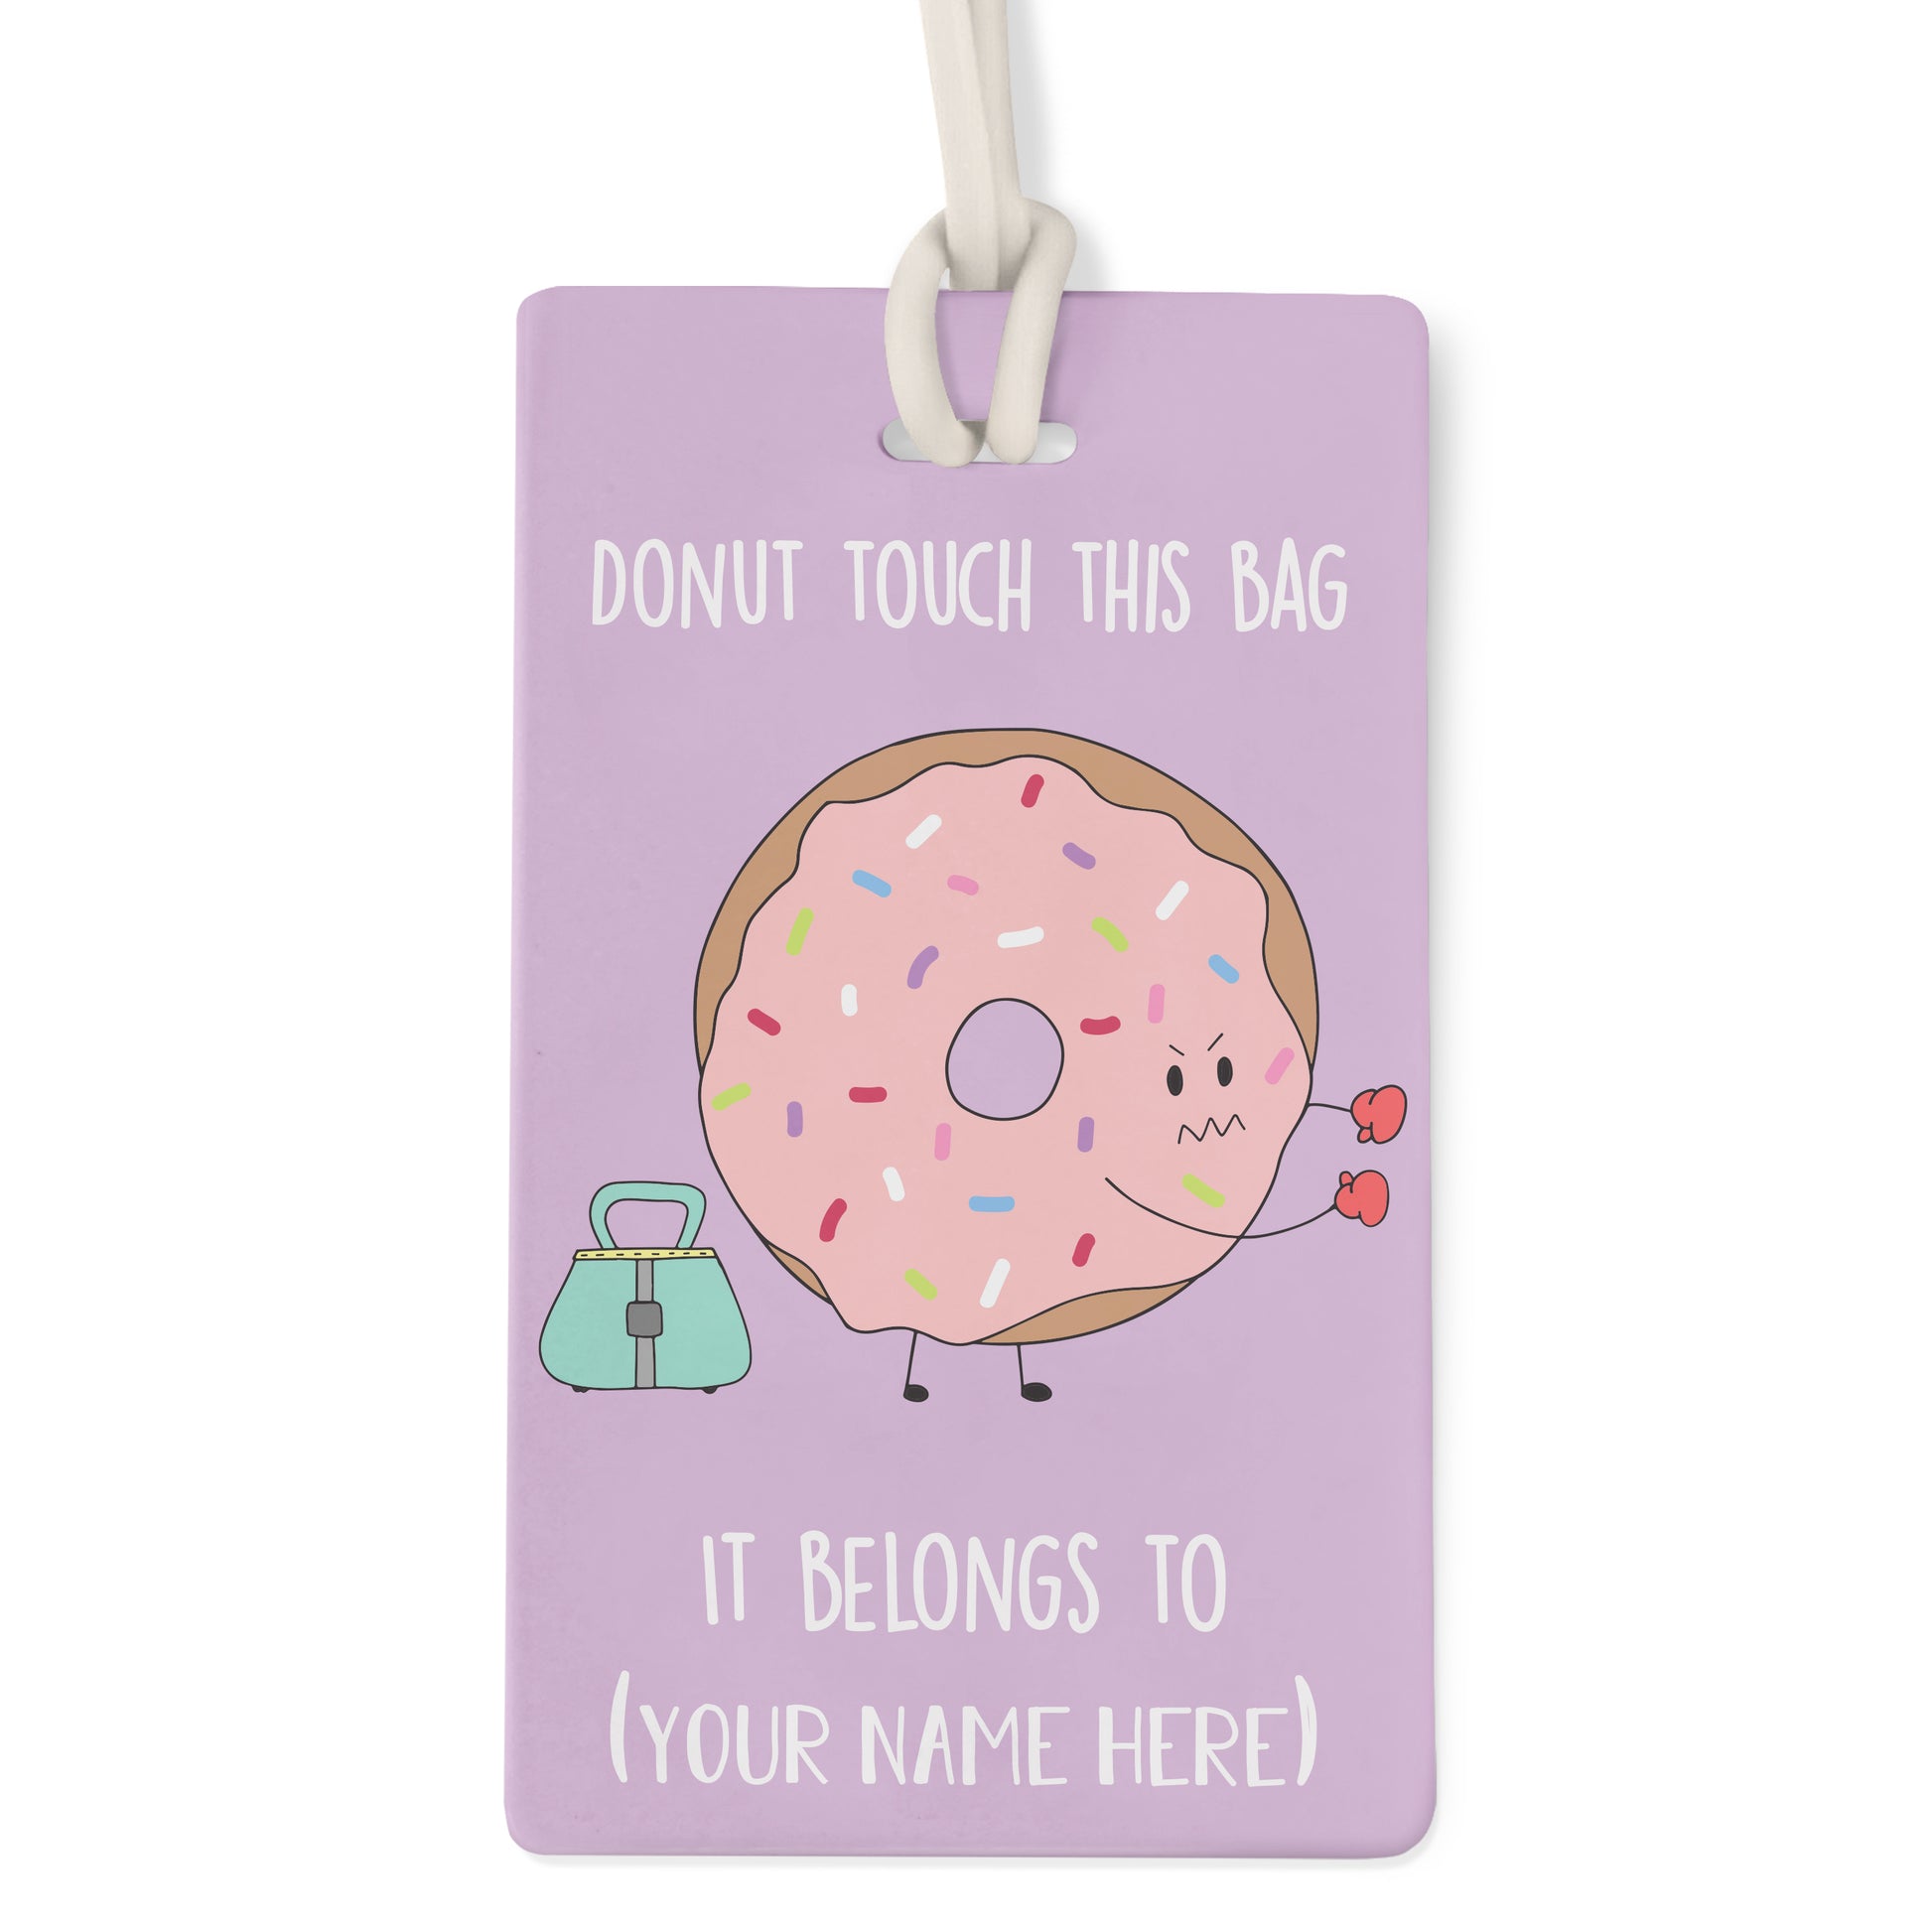 Urbanhand urban hand Donut touch this Bag tag luggage Personalised Cute quirky travel accessories